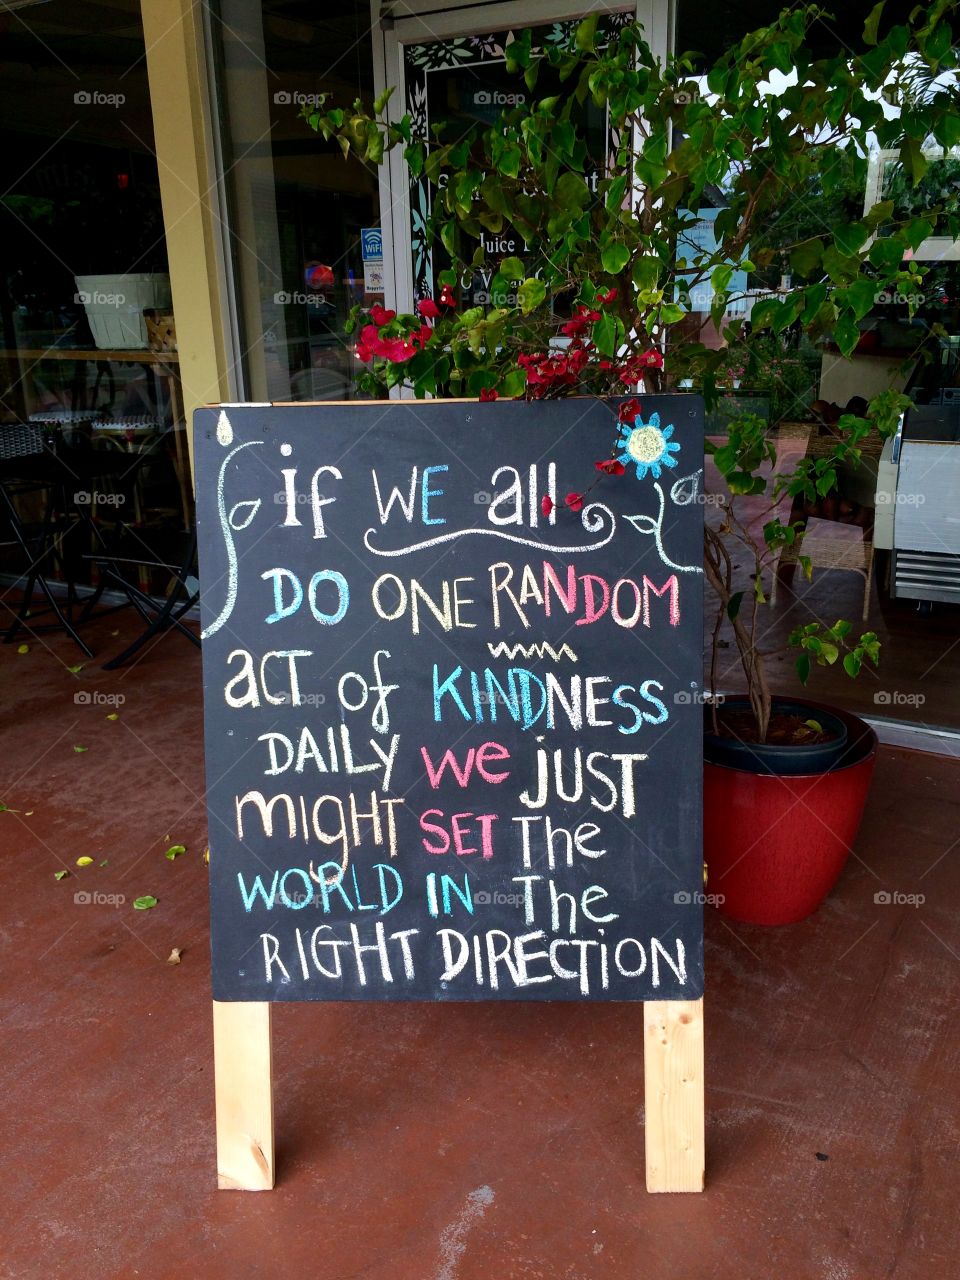 Acts of Kindness. Sign about 'random acts of kindness '  outside a store on Sanibel Island Florida 